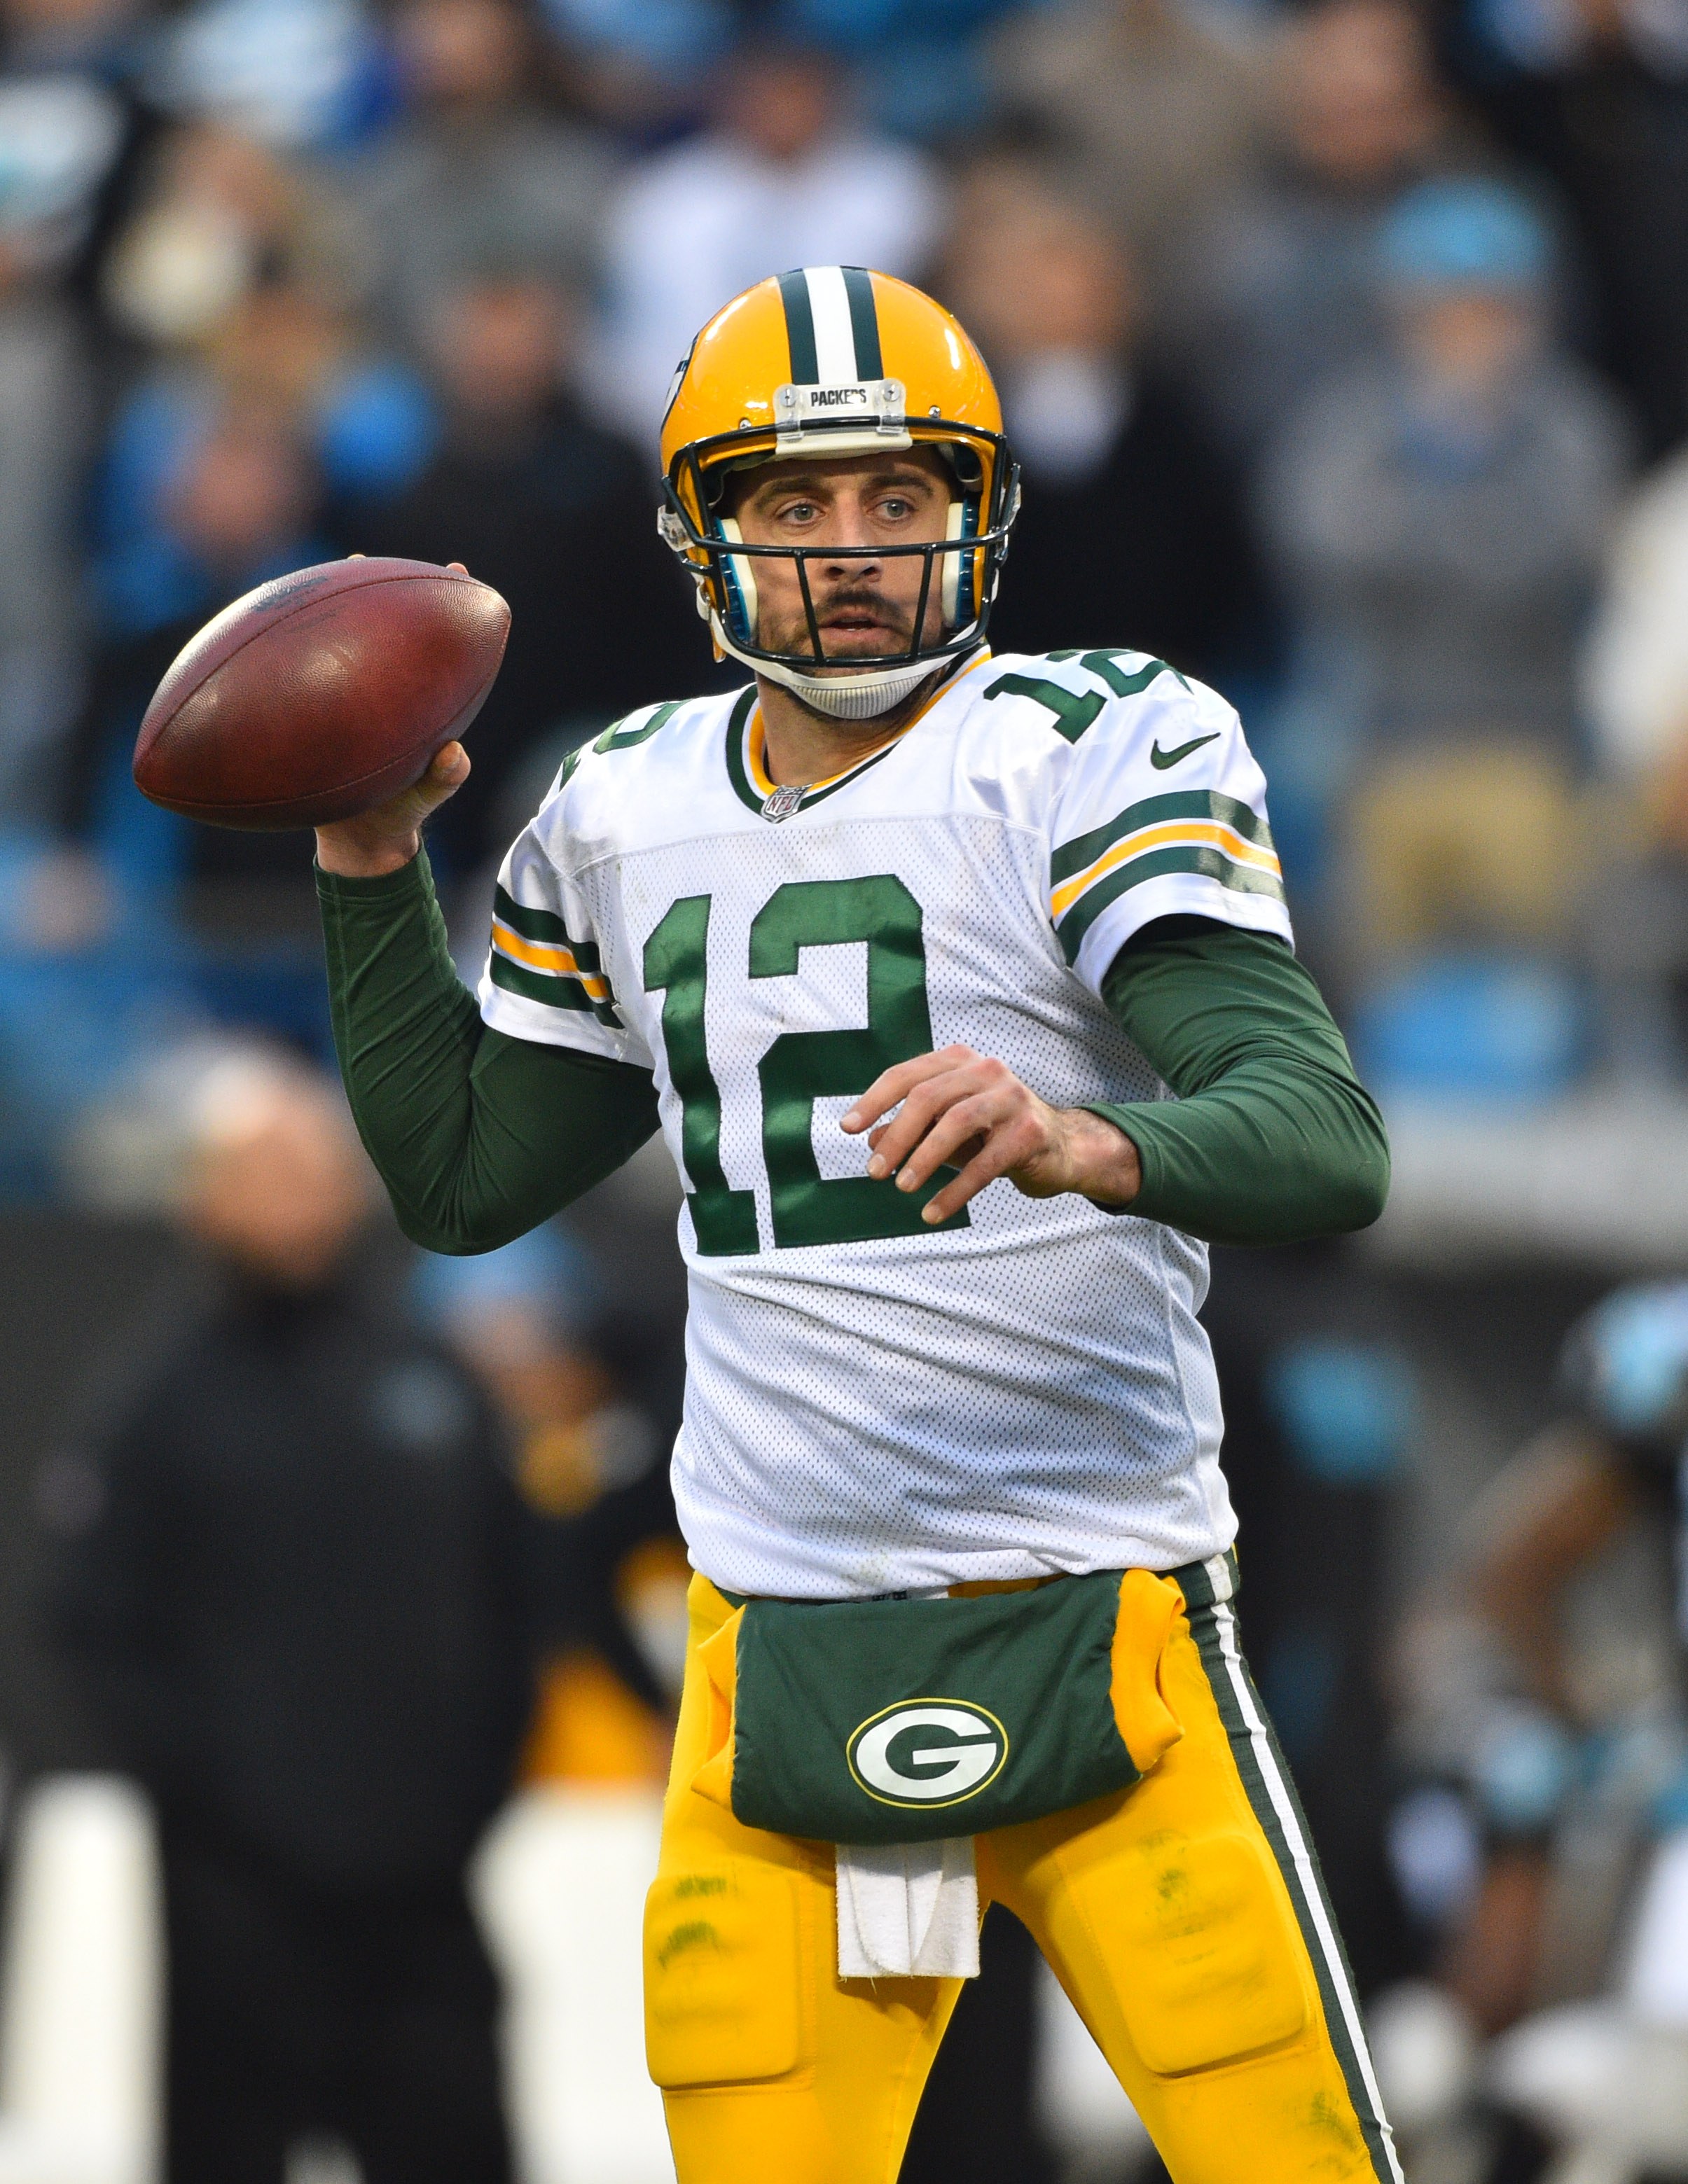 Teams Claim Packers Violated IR Rules With QB Aaron Rodgers